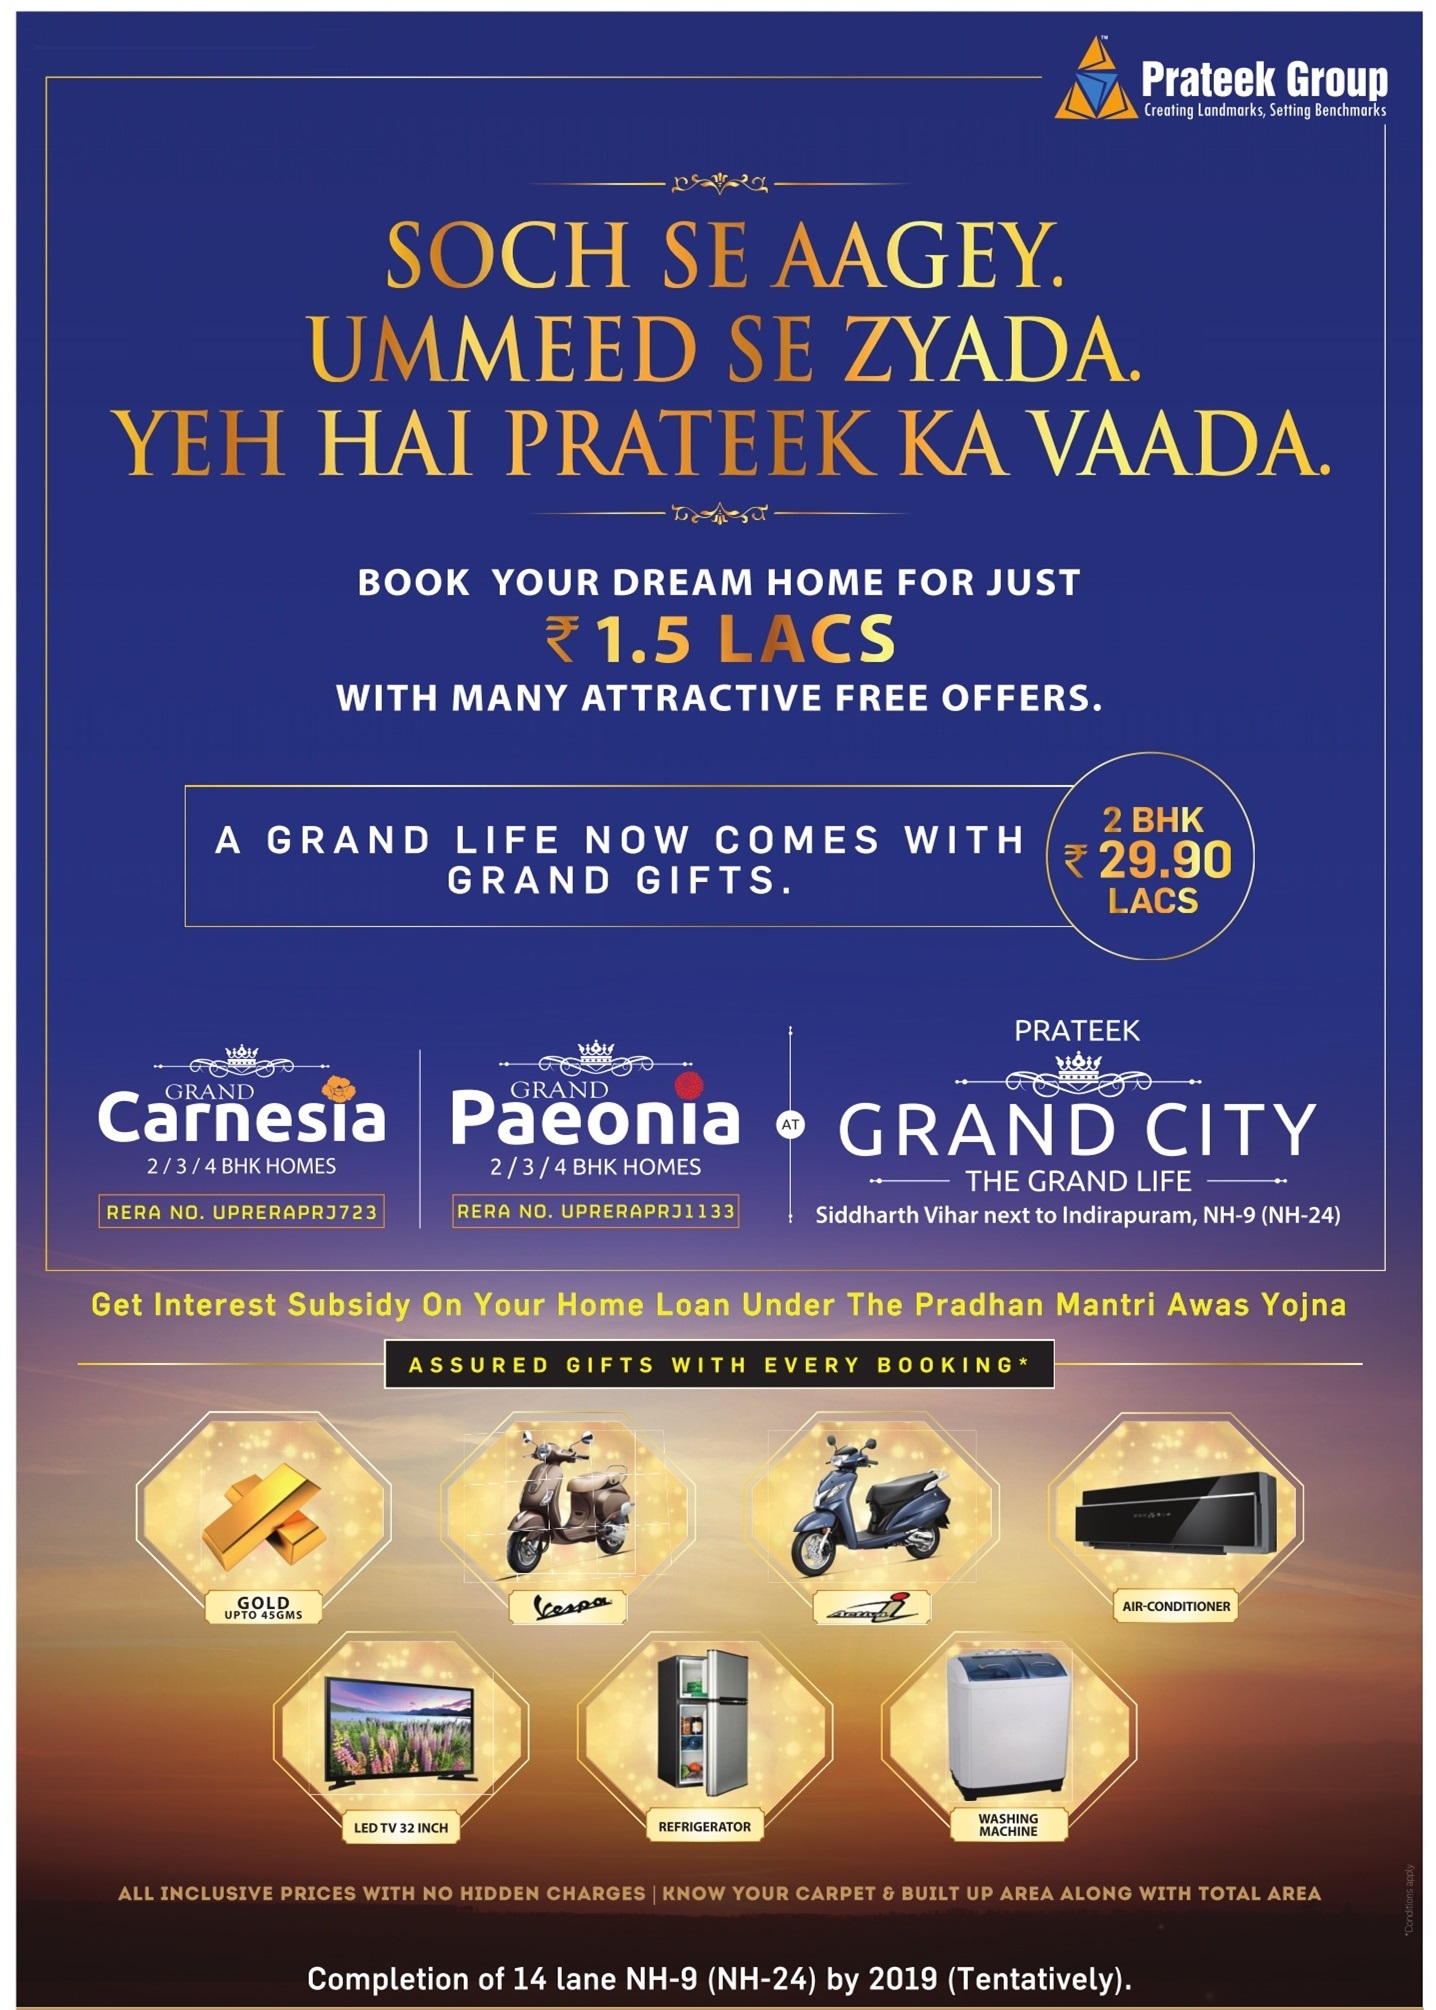 Grand life now comes with grand gifts at Prateek Group's projects in Ghaziabad Update